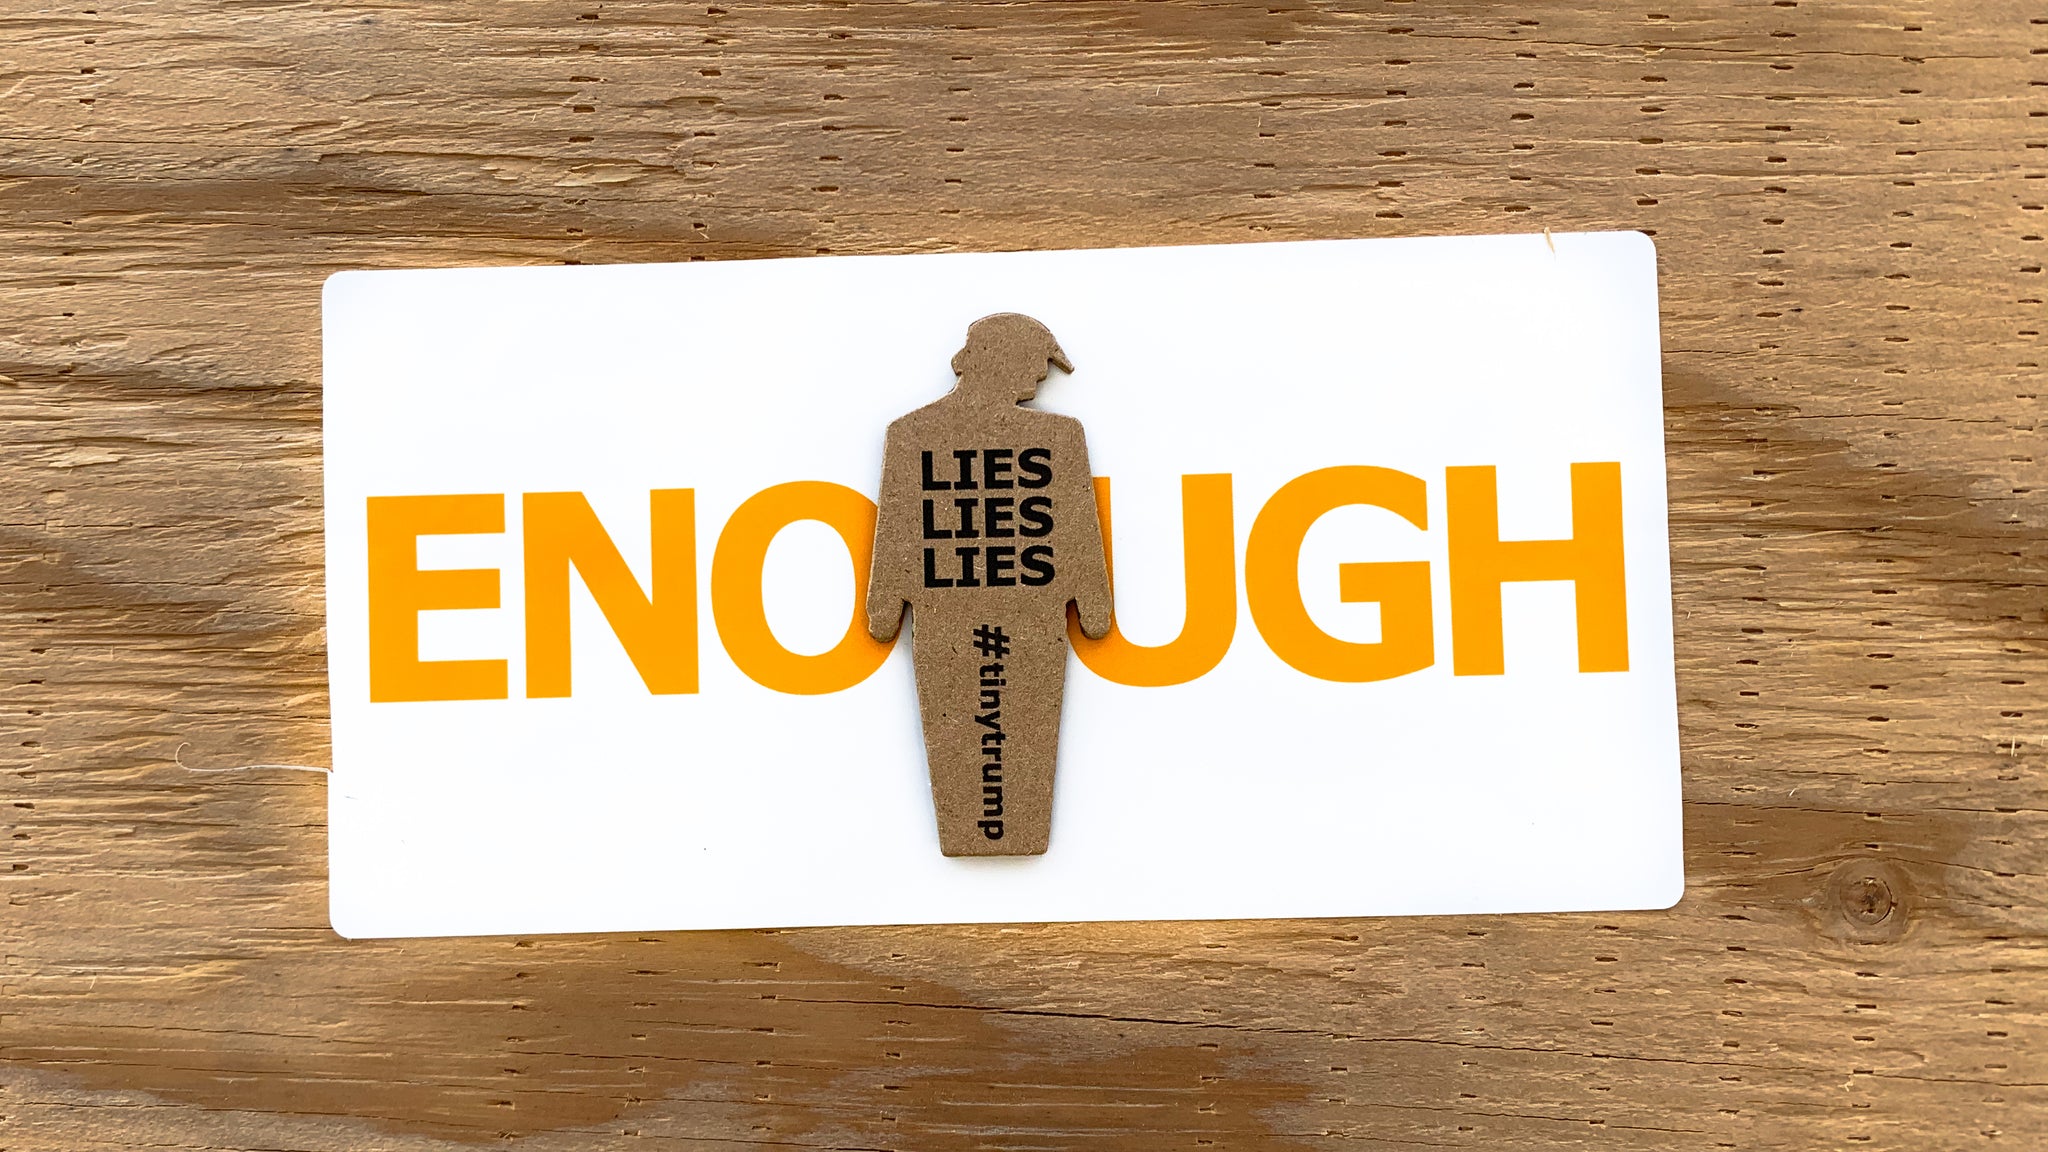 "ENOUGH" tiny trump sticker measuring 3.75" x 3.5" shown with a "Lies Lies Lies" tiny trump stuck in the middle; both are mounted on a piece of plywood